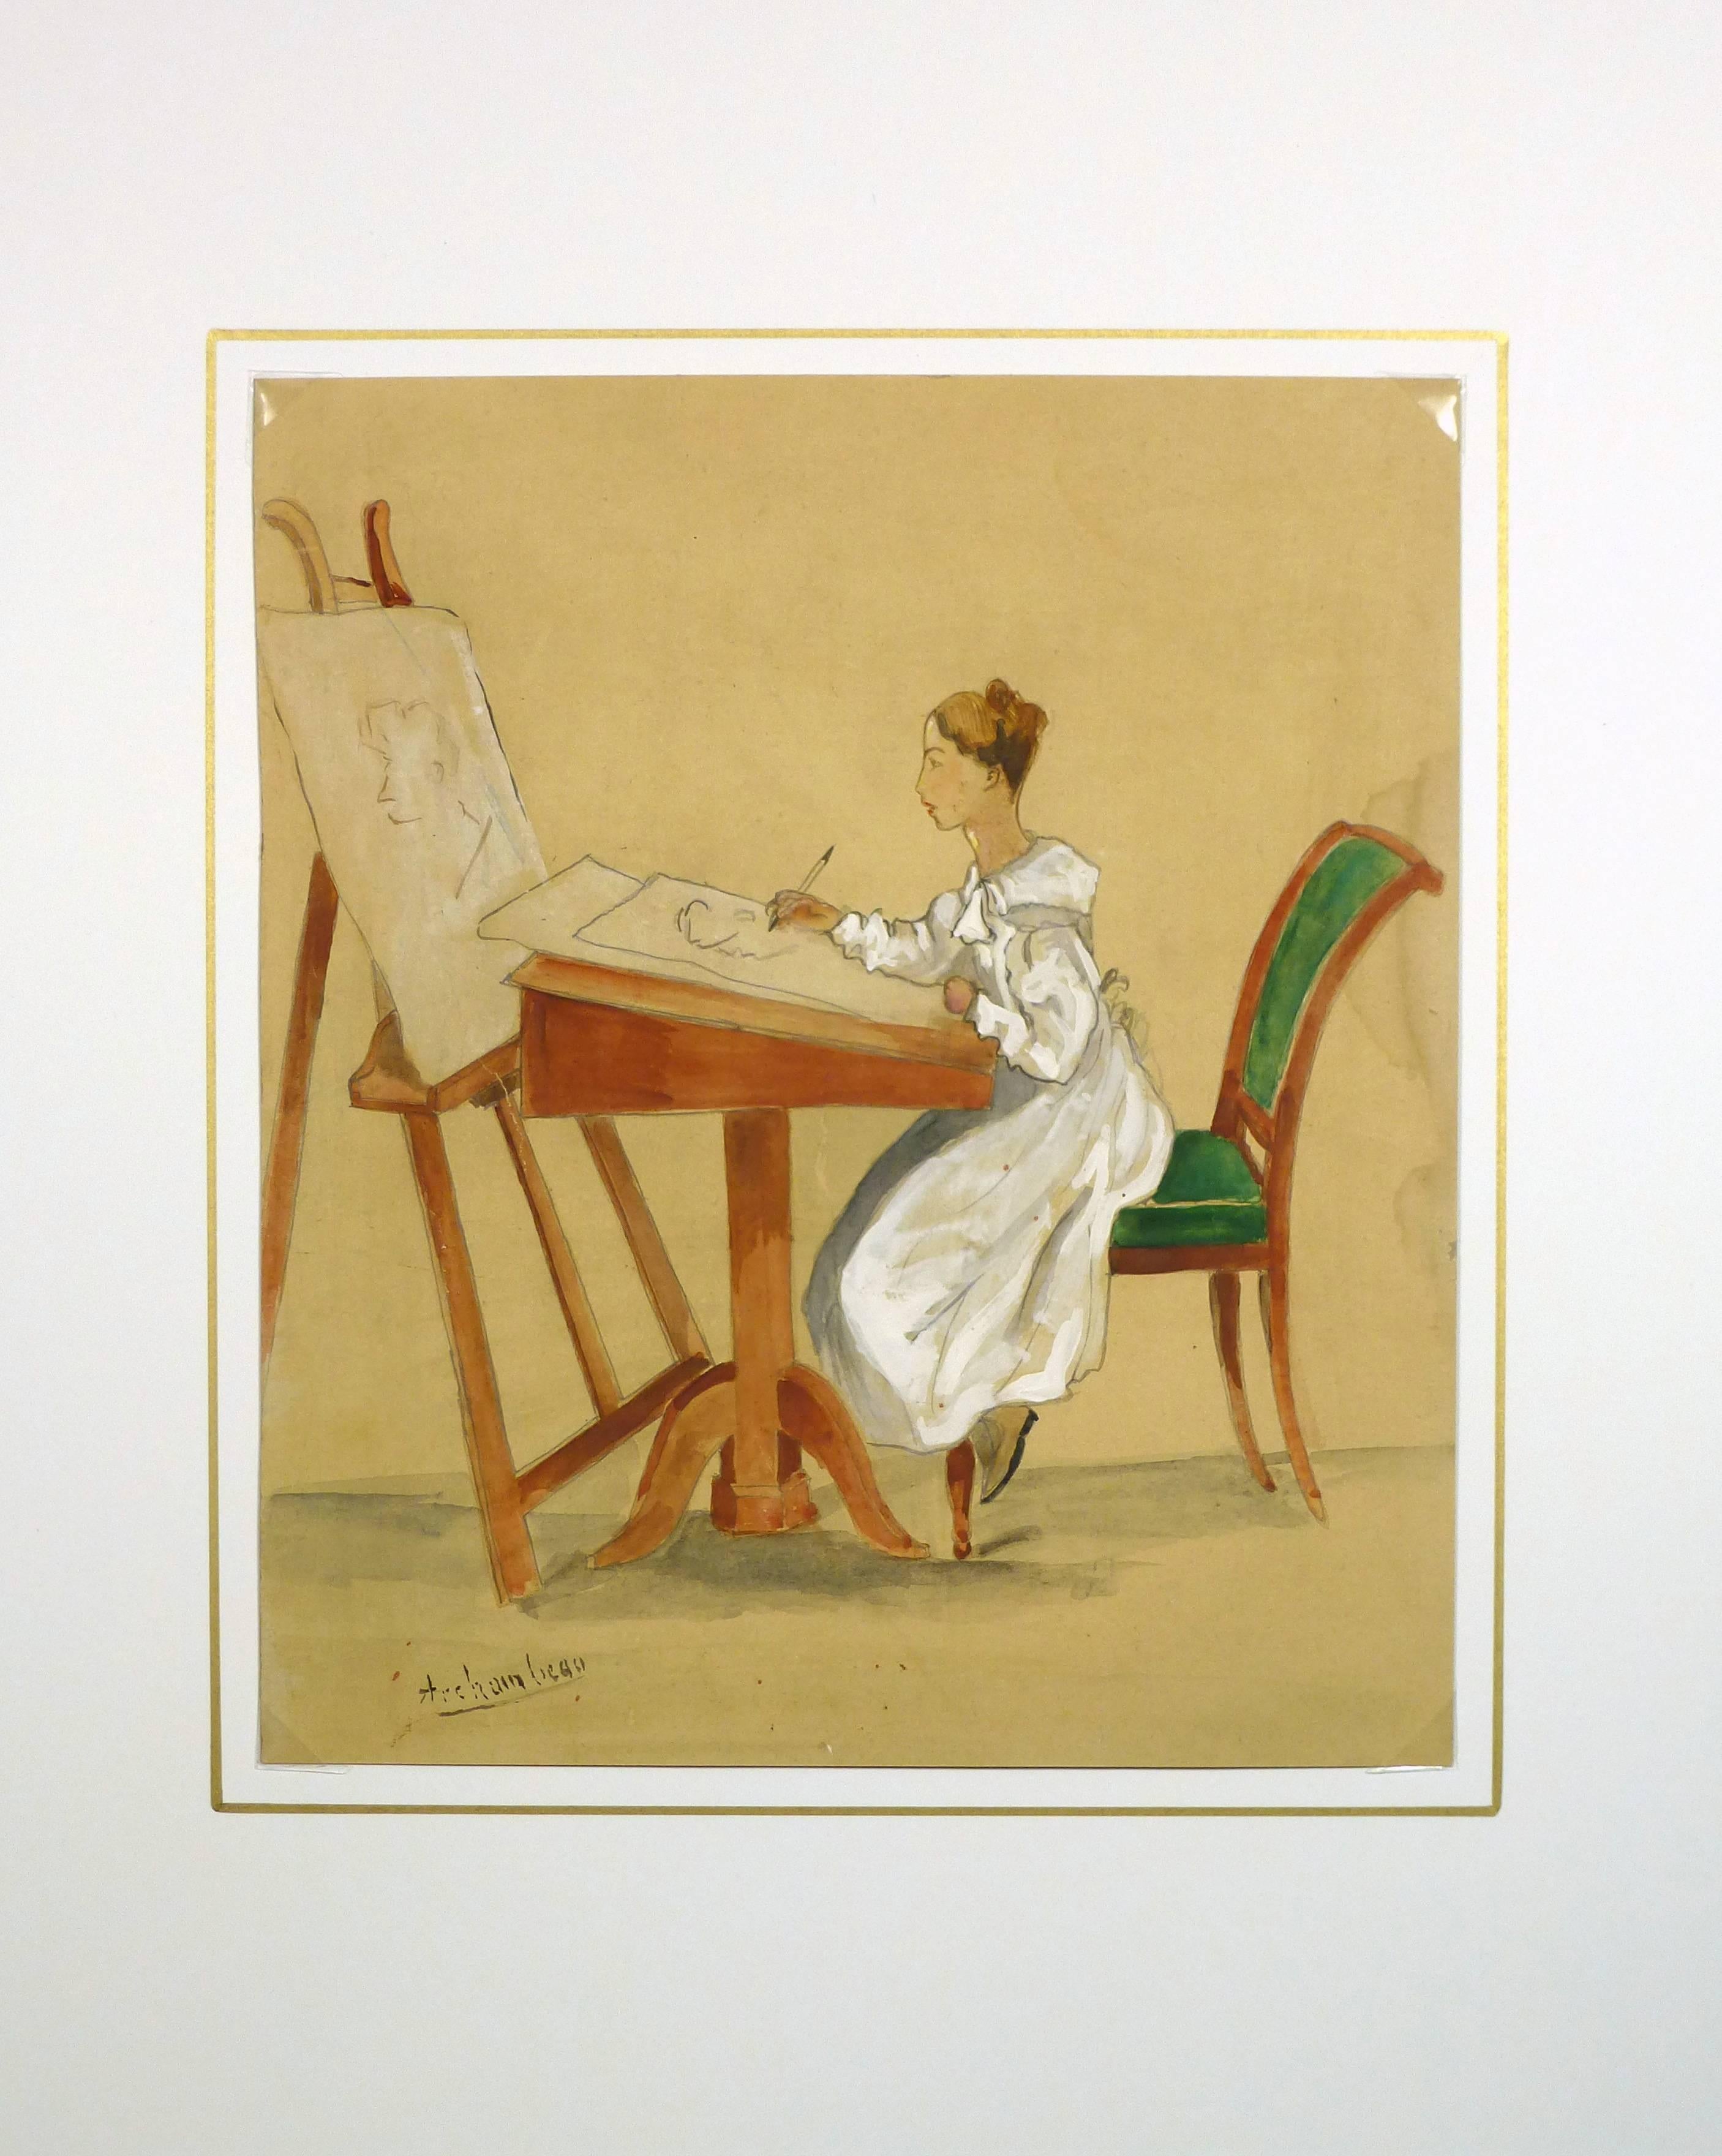 Early-century French gouache painting of a young woman drawing, circa 1900.  Signed by artist lower left.

Original artwork on paper displayed on a white mat with a gold border. Mat fits a standard size frame. Archival plastic sleeve and Certificate